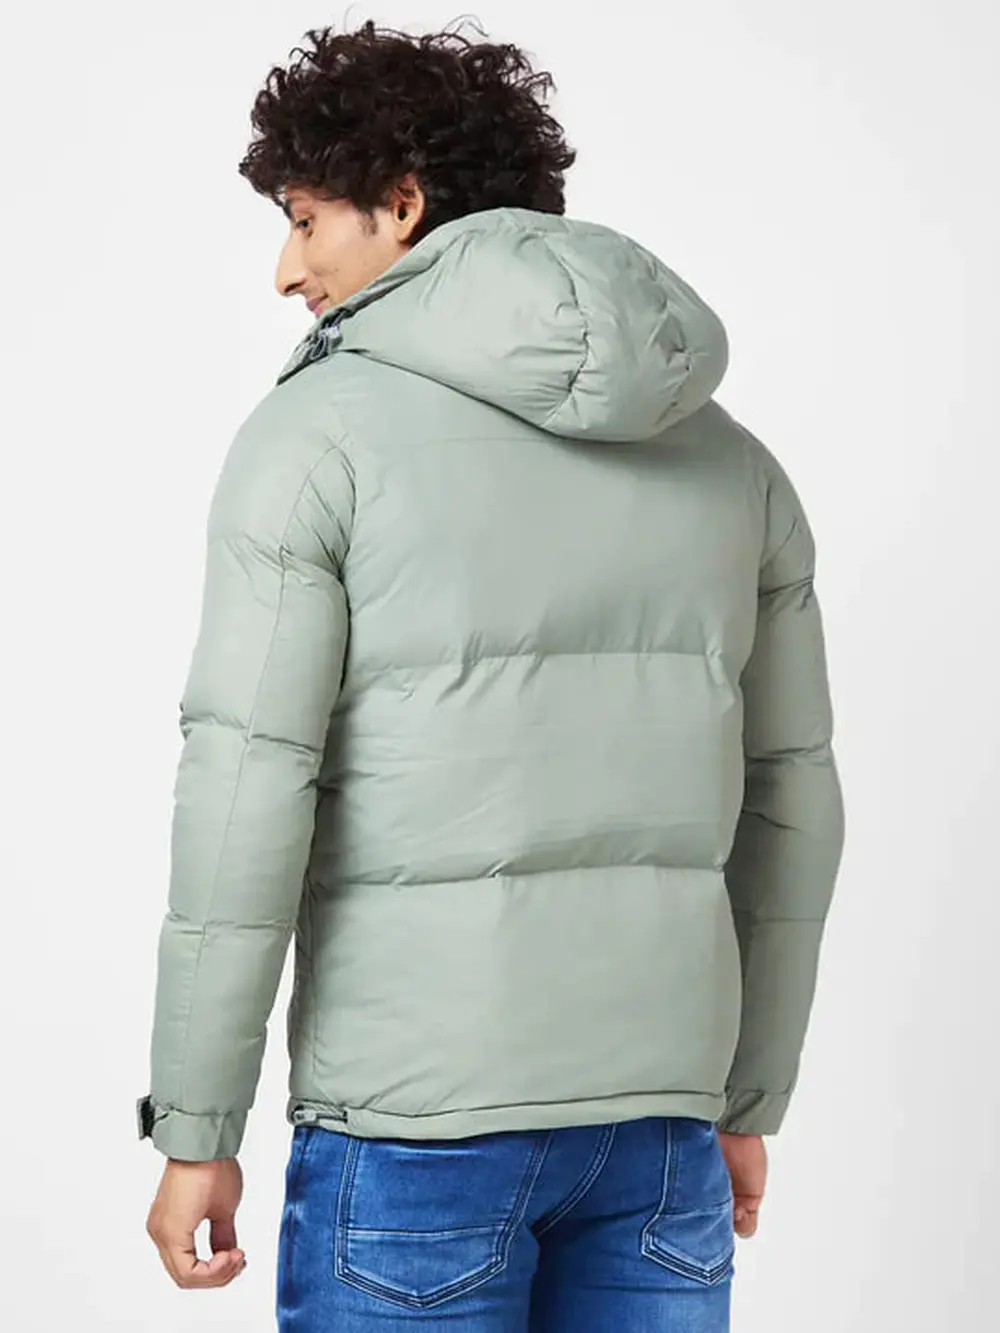 Men'S Puffer Jacket With Zipper Patch Pocket & Printed Details On Sleeves